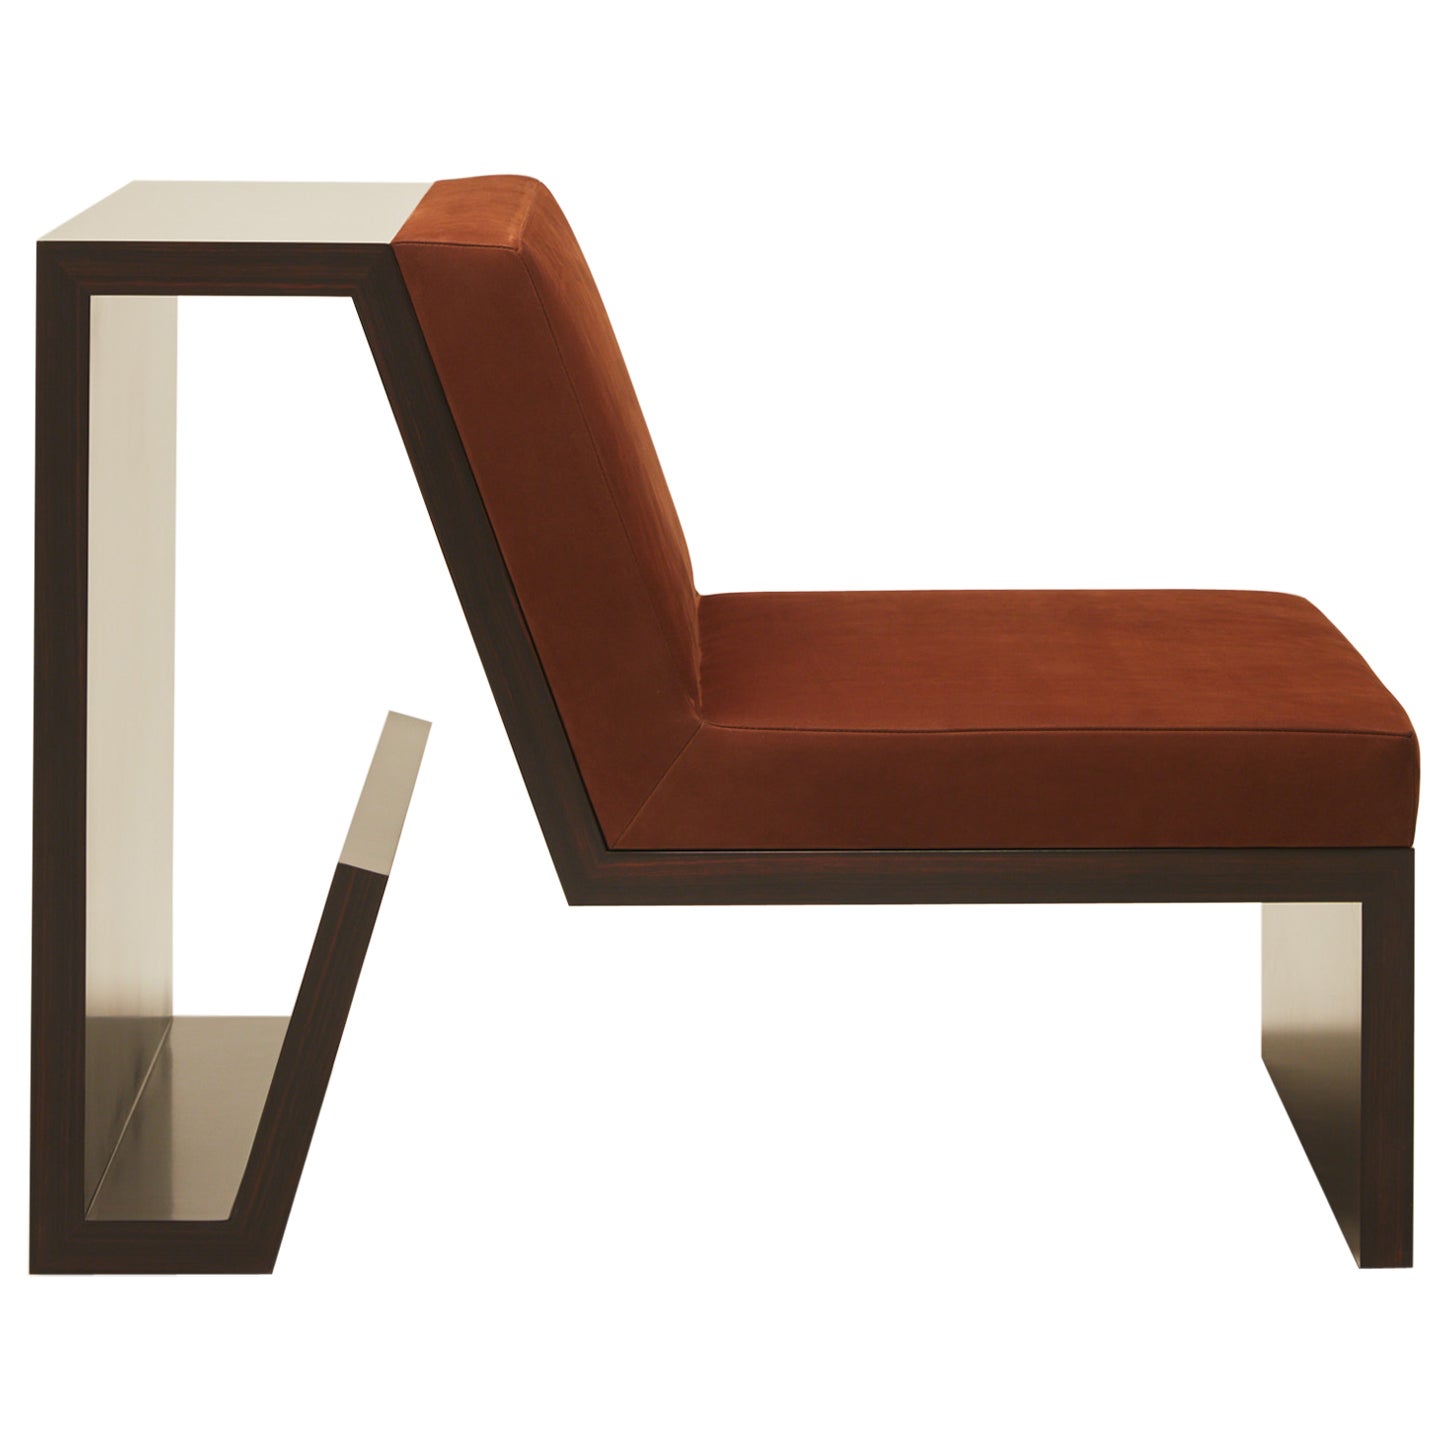 Continuous Chair - Hand applied wood veneer & leather upholstery For Sale